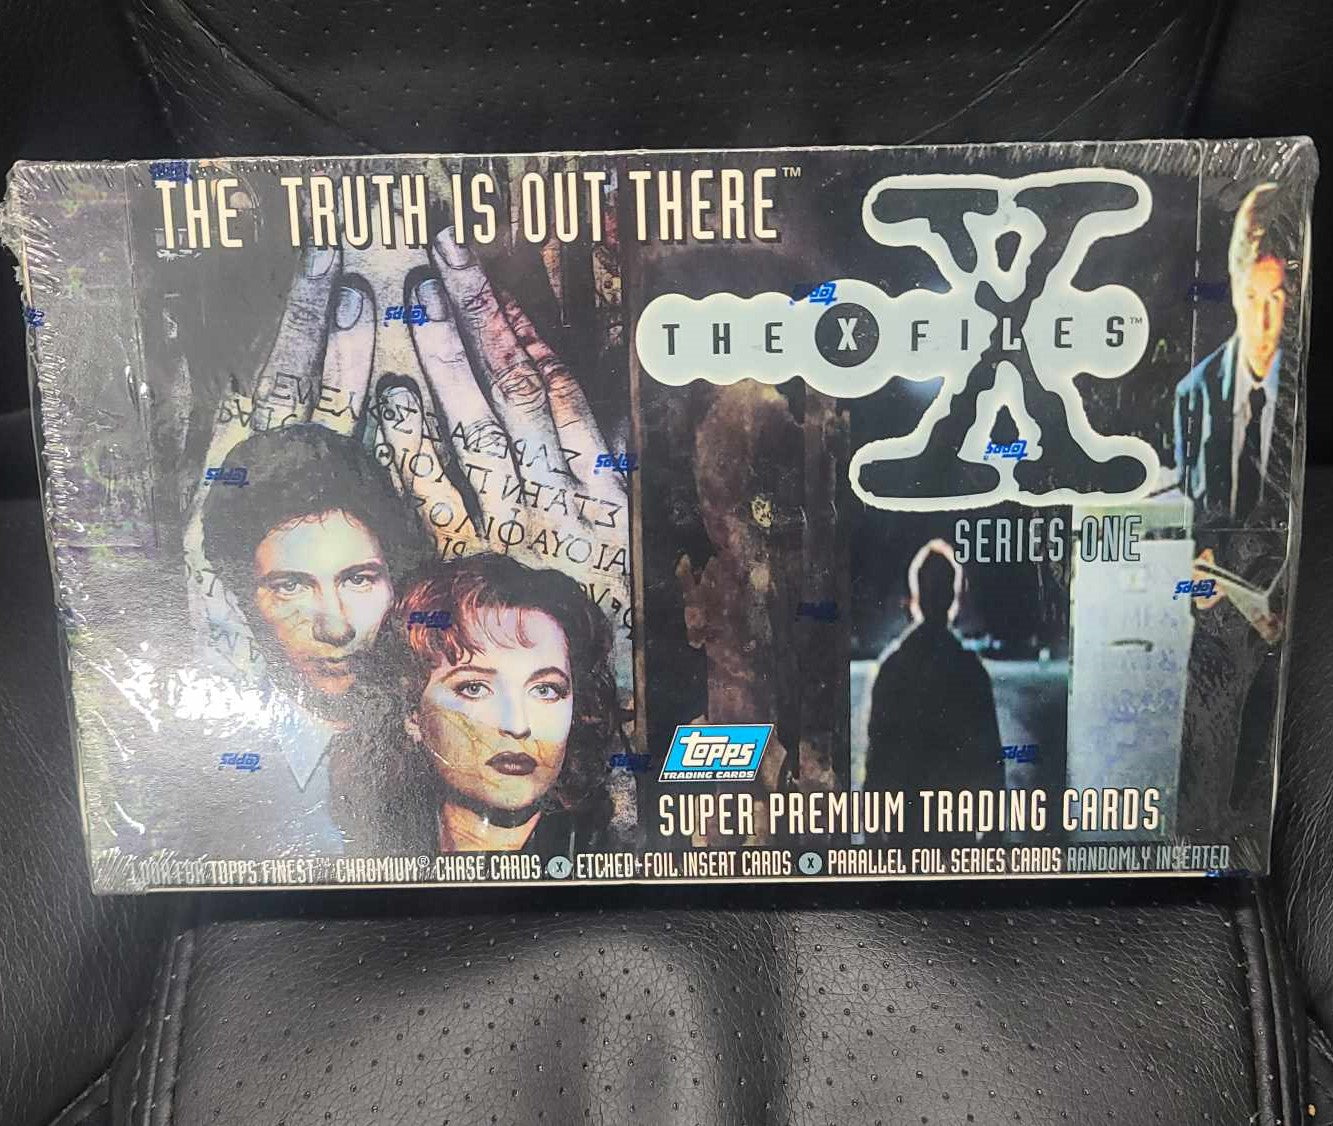 The X-Files Series One Trading cards - Topps - Sealed box.